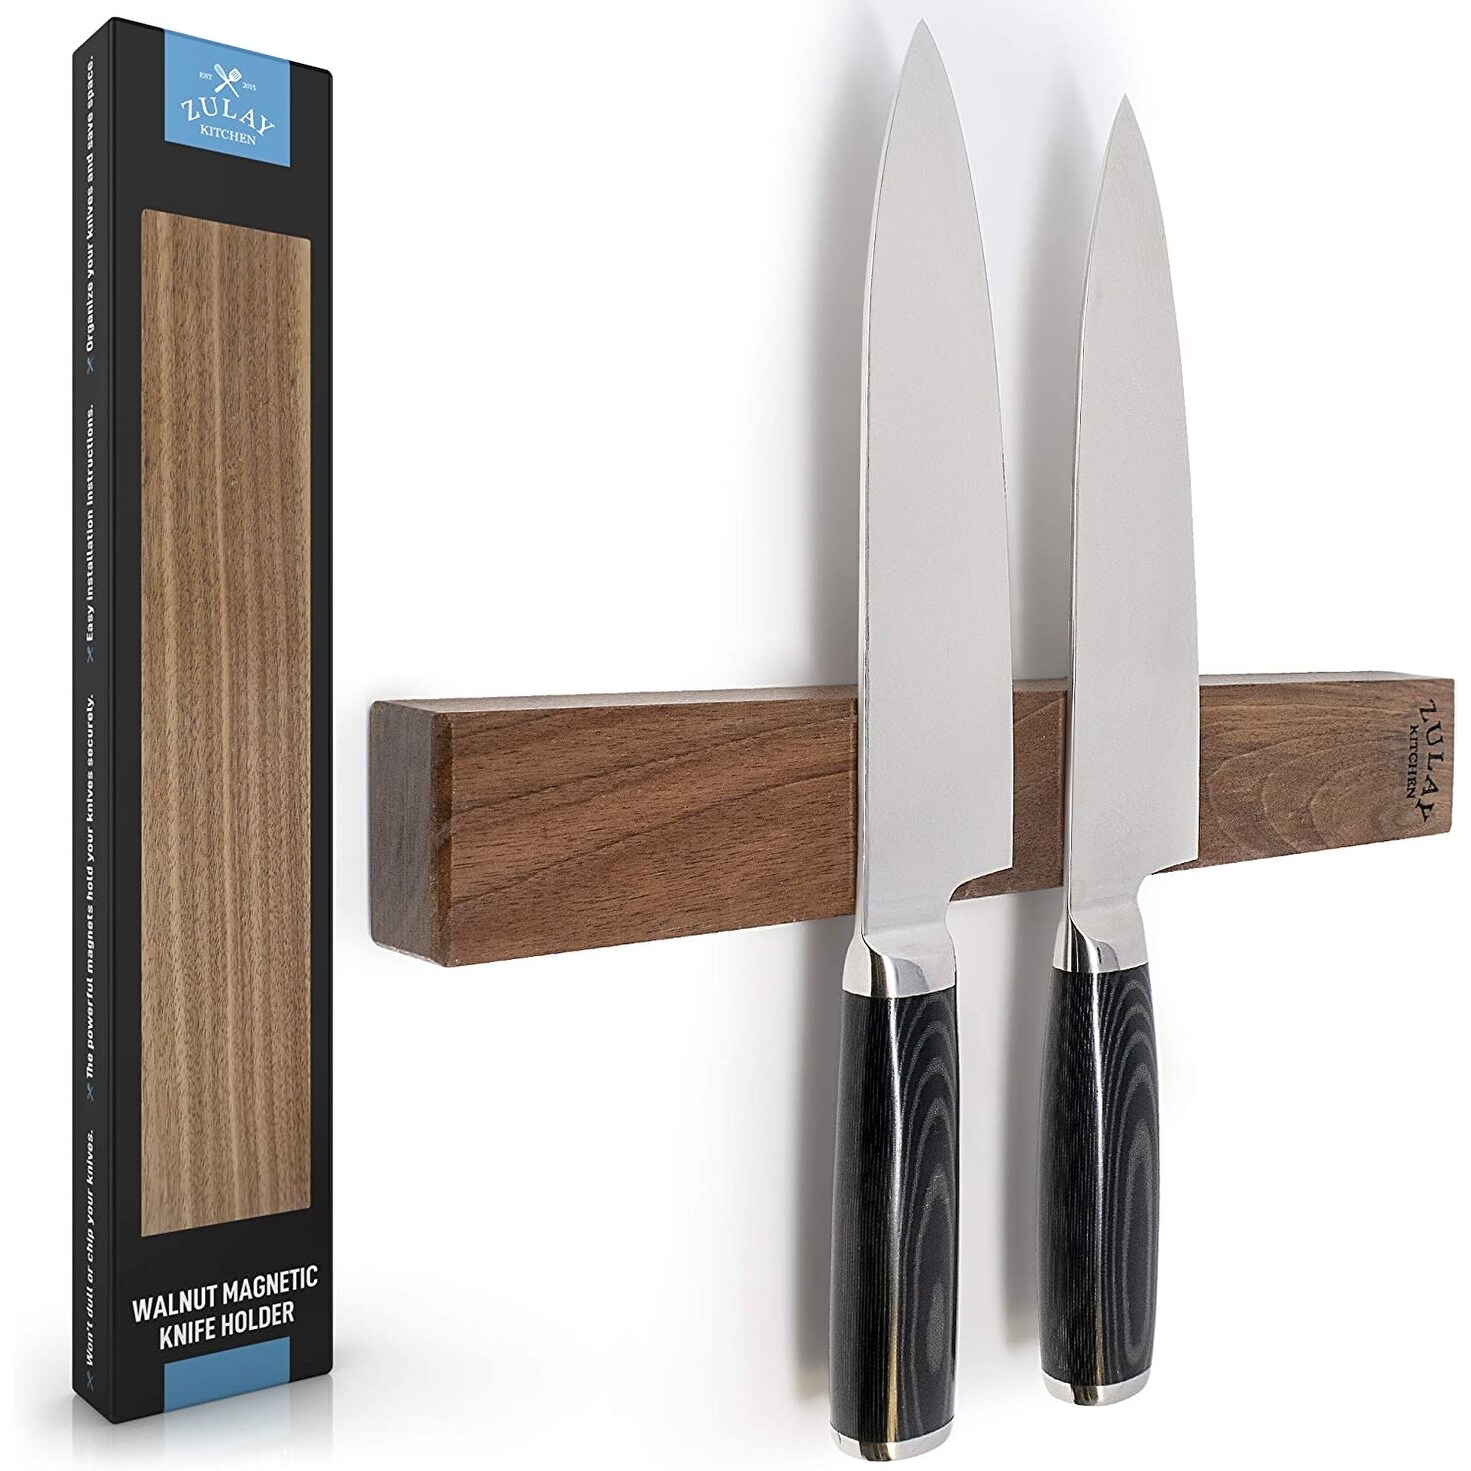 https://ak1.ostkcdn.com/images/products/is/images/direct/414f049dcdb7cbe954fc175197dcf59a94159e70/Zulay-Kitchen-Walnut-Magnetic-Knife-Holder---Natural-Walnut-Hardwood.jpg